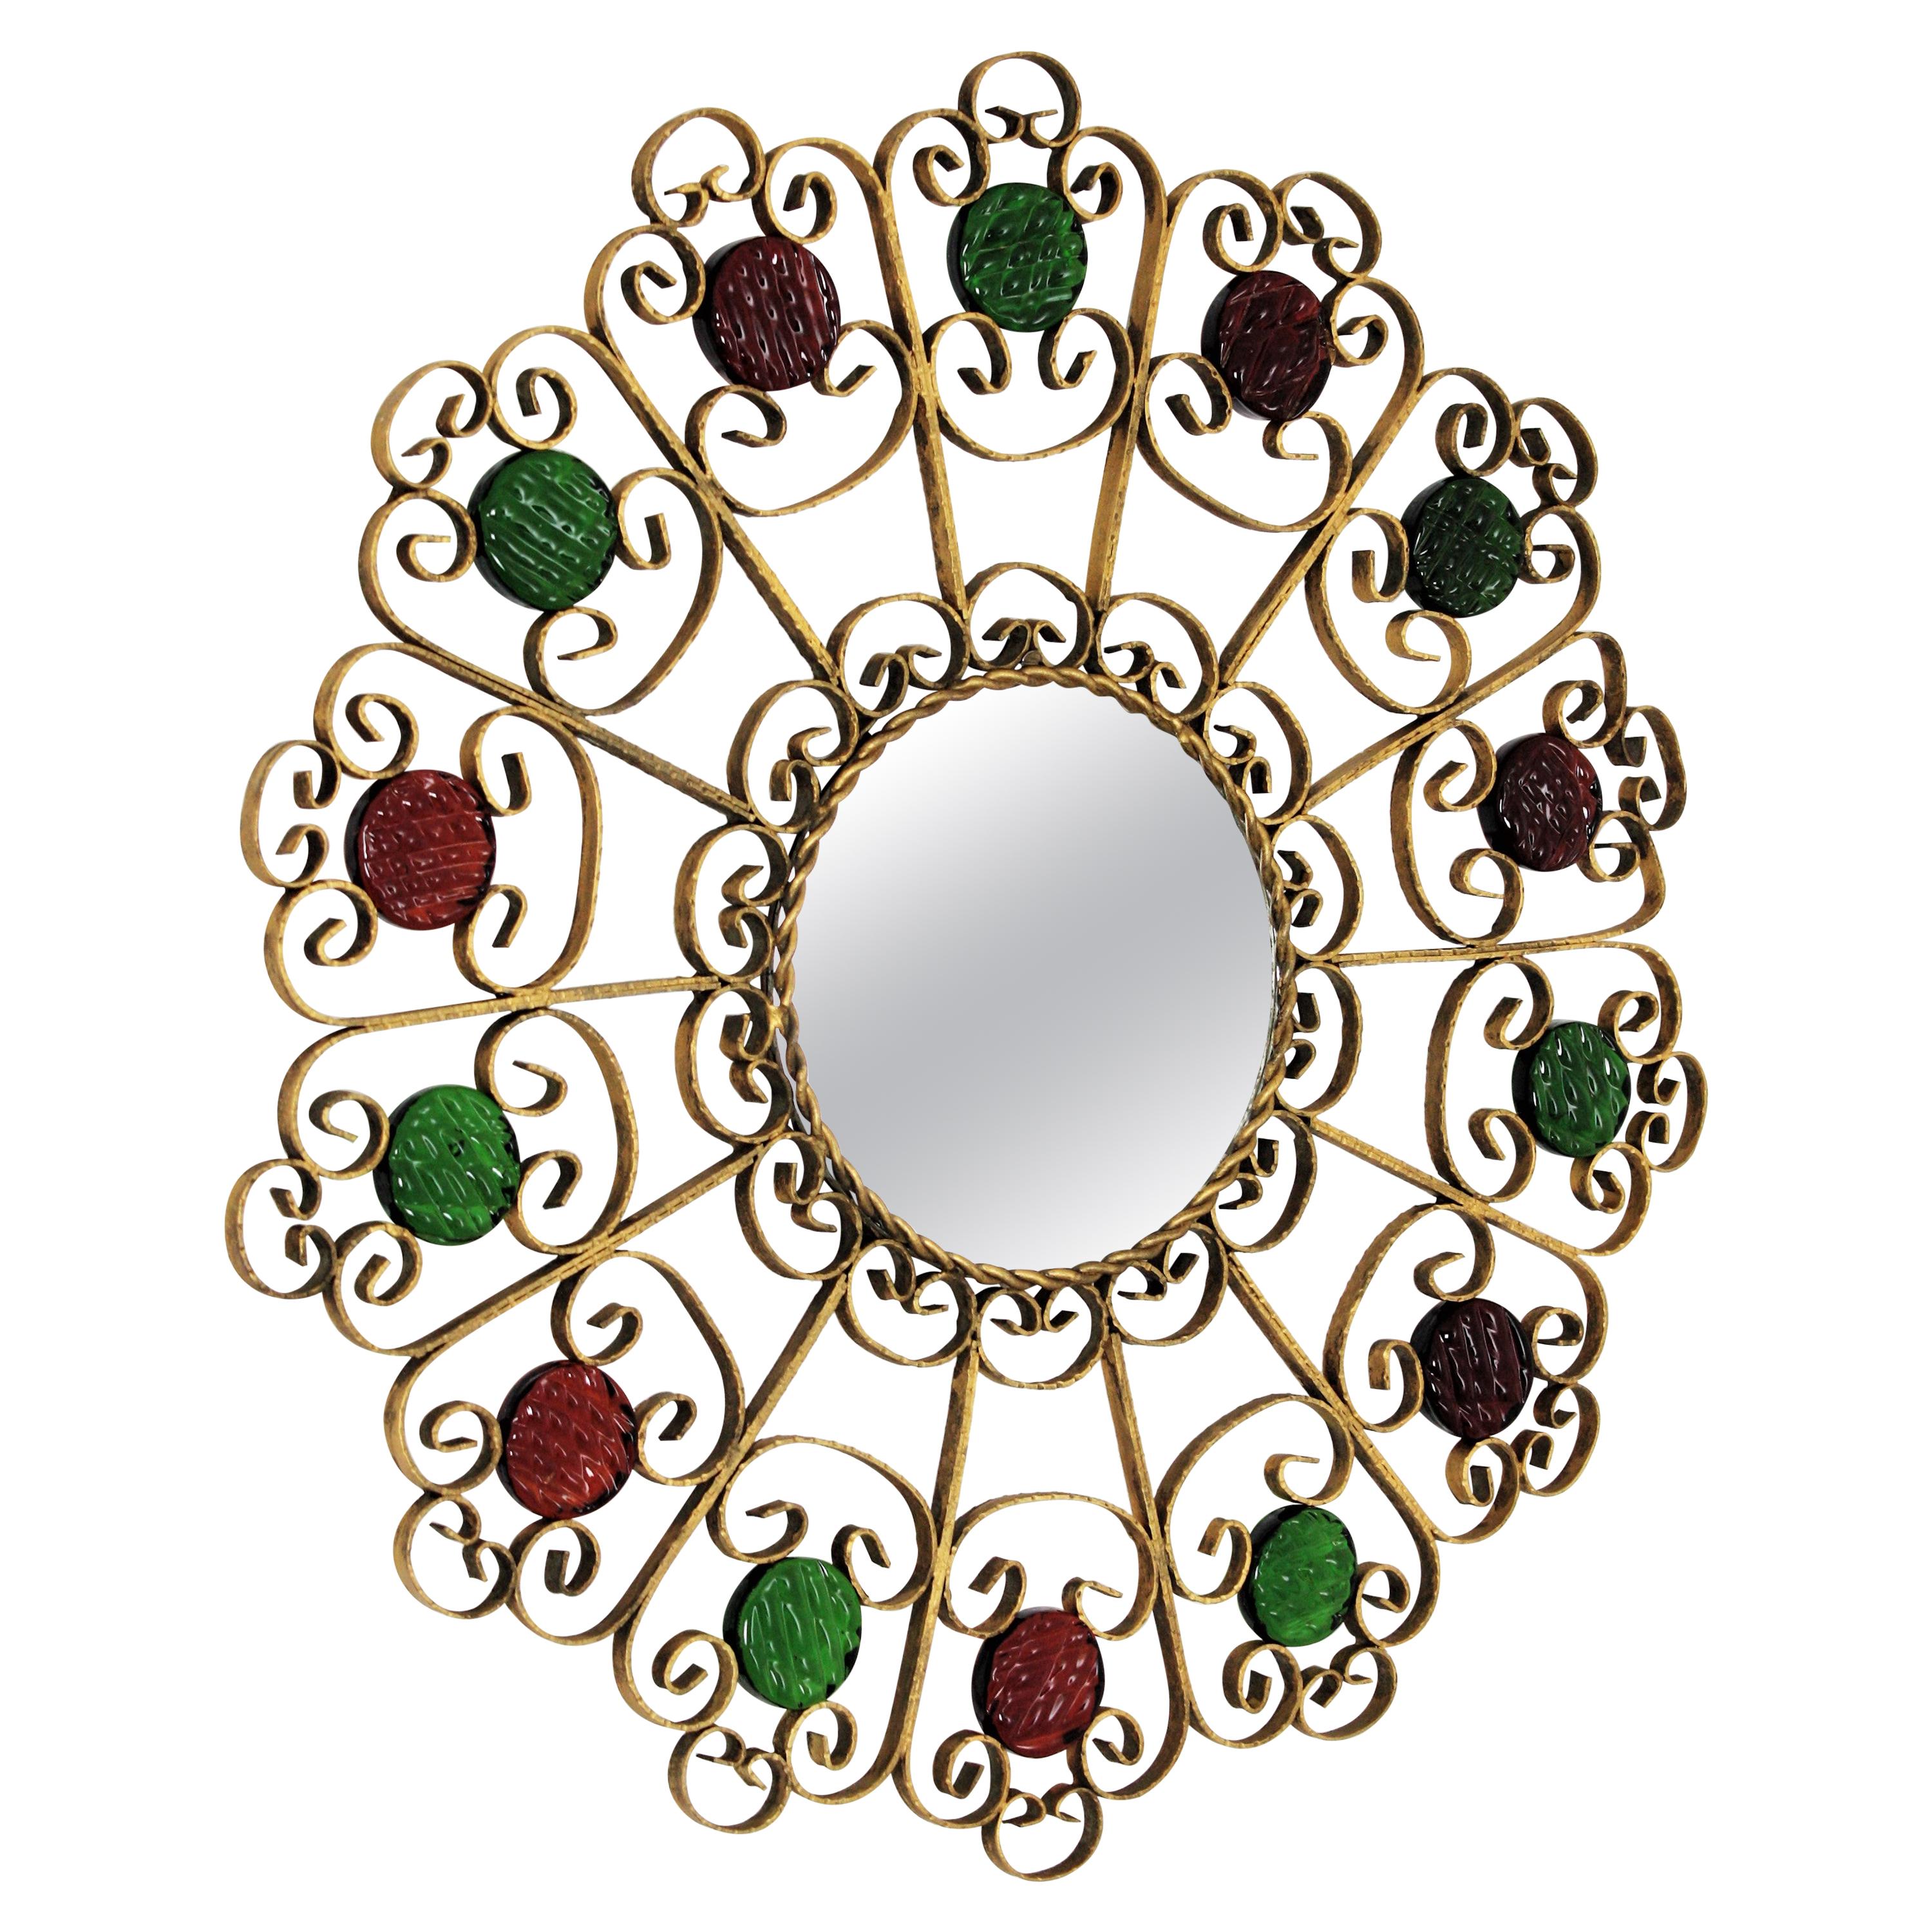 Spanish wrought iron scrollwork mirrorr accented by red and green glasses

Beautiful wrought gilt iron scroll motif mirror framed with garnet and green glasses, Spain, 1950s.
The frame shows the Spanish traditional wrought iron work: it is richly